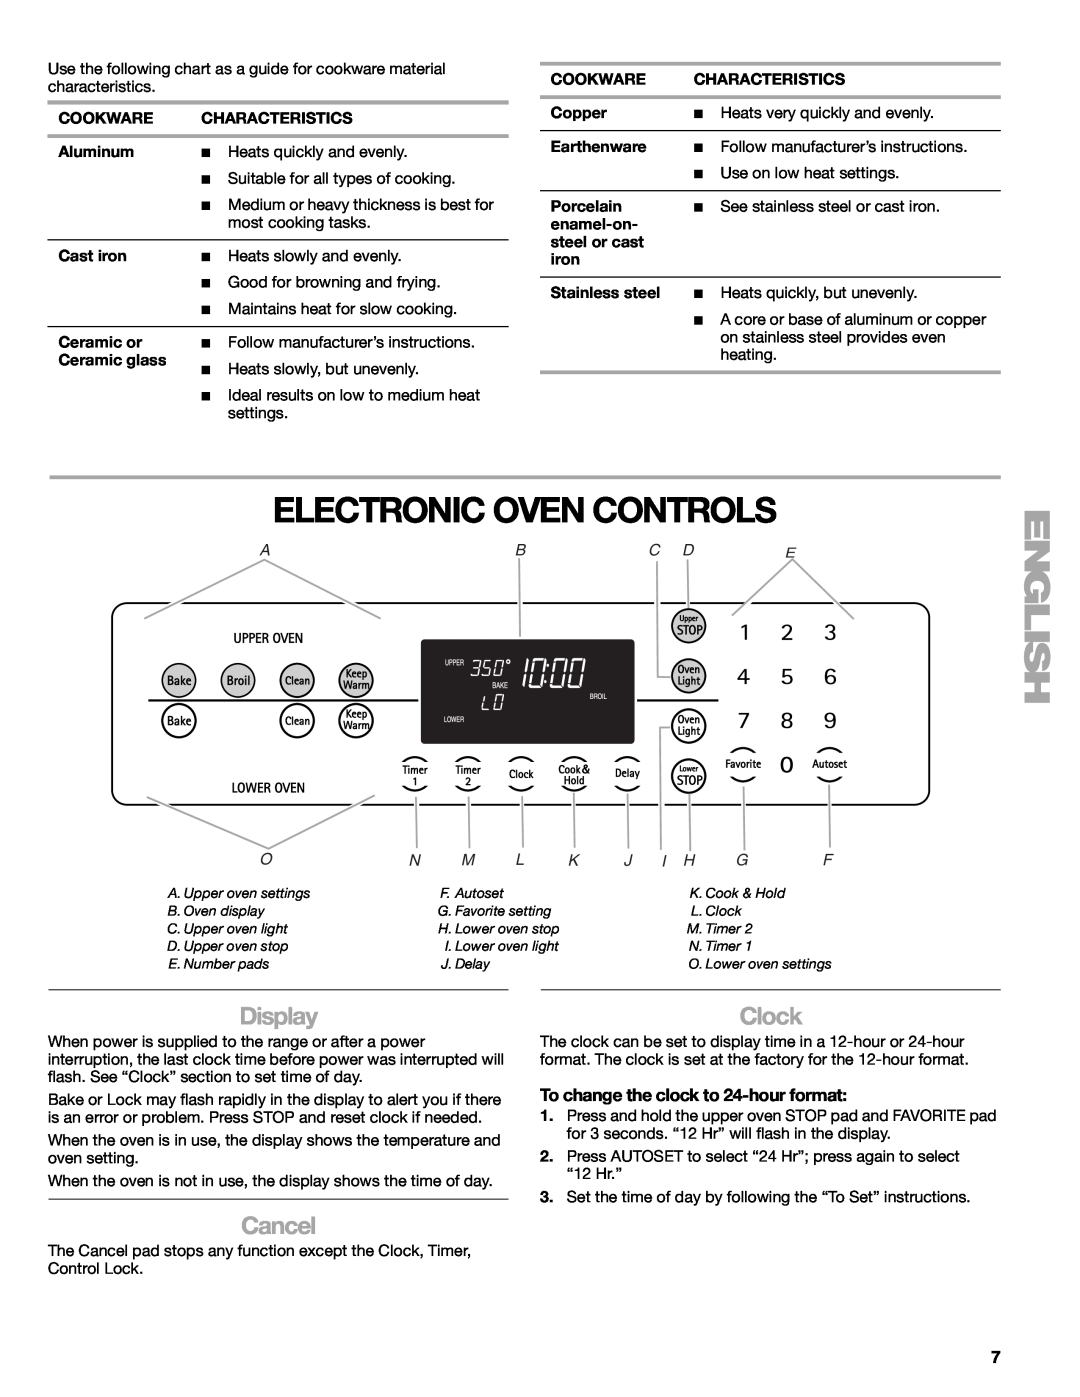 Kenmore 66578002700 manual Electronic Oven Controls, Display, Cancel, Clock, To change the clock to 24-hour format, Abc De 